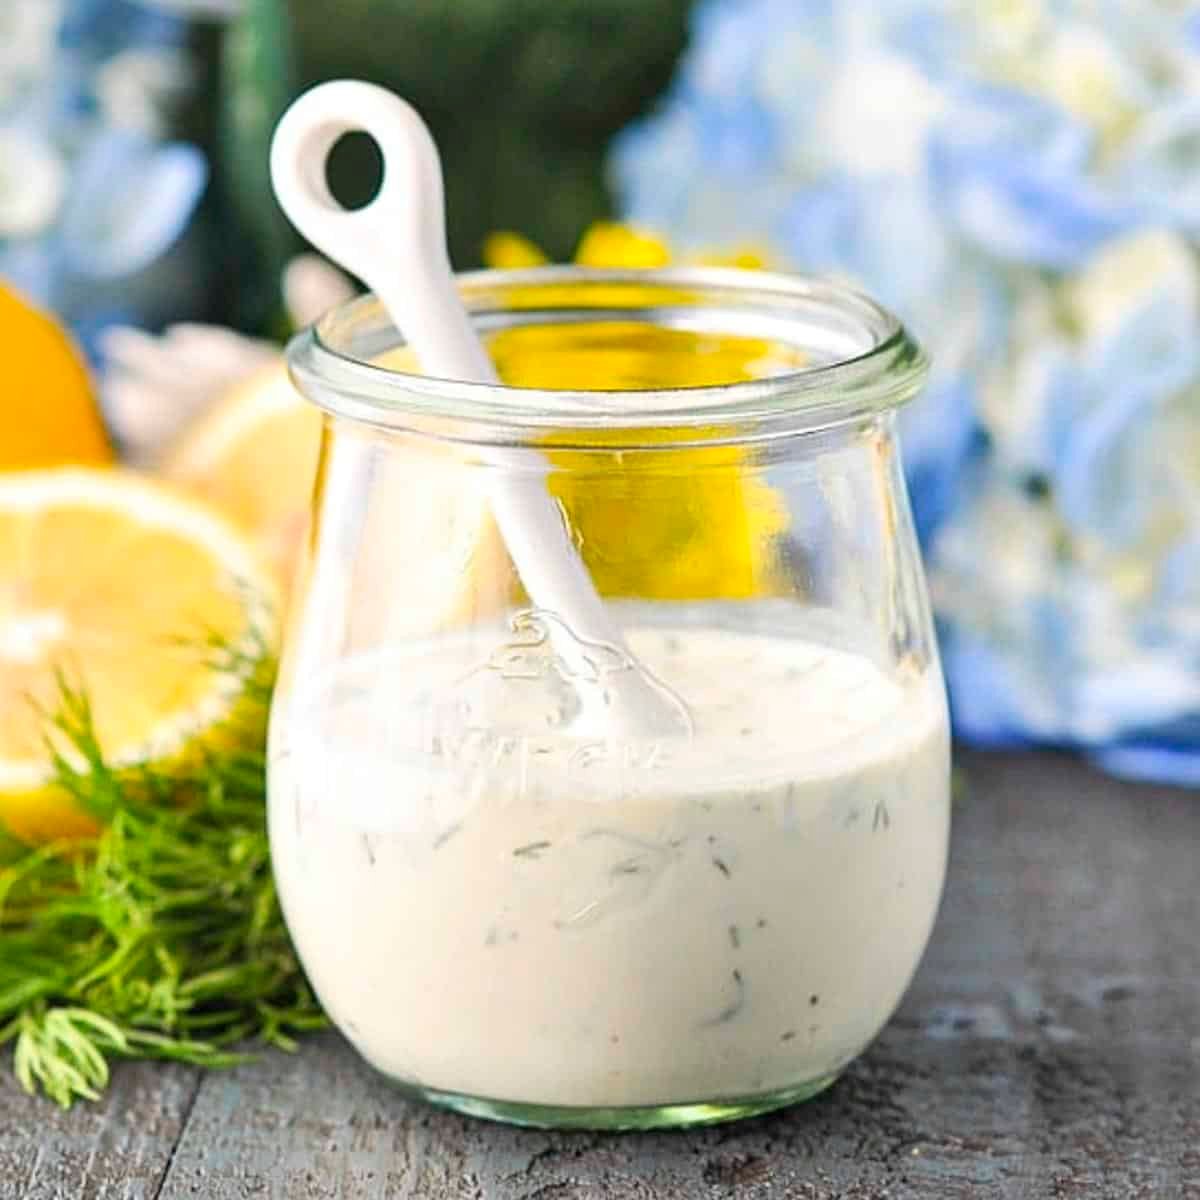 Square side shot of homemade buttermilk dressing in a glass jar.